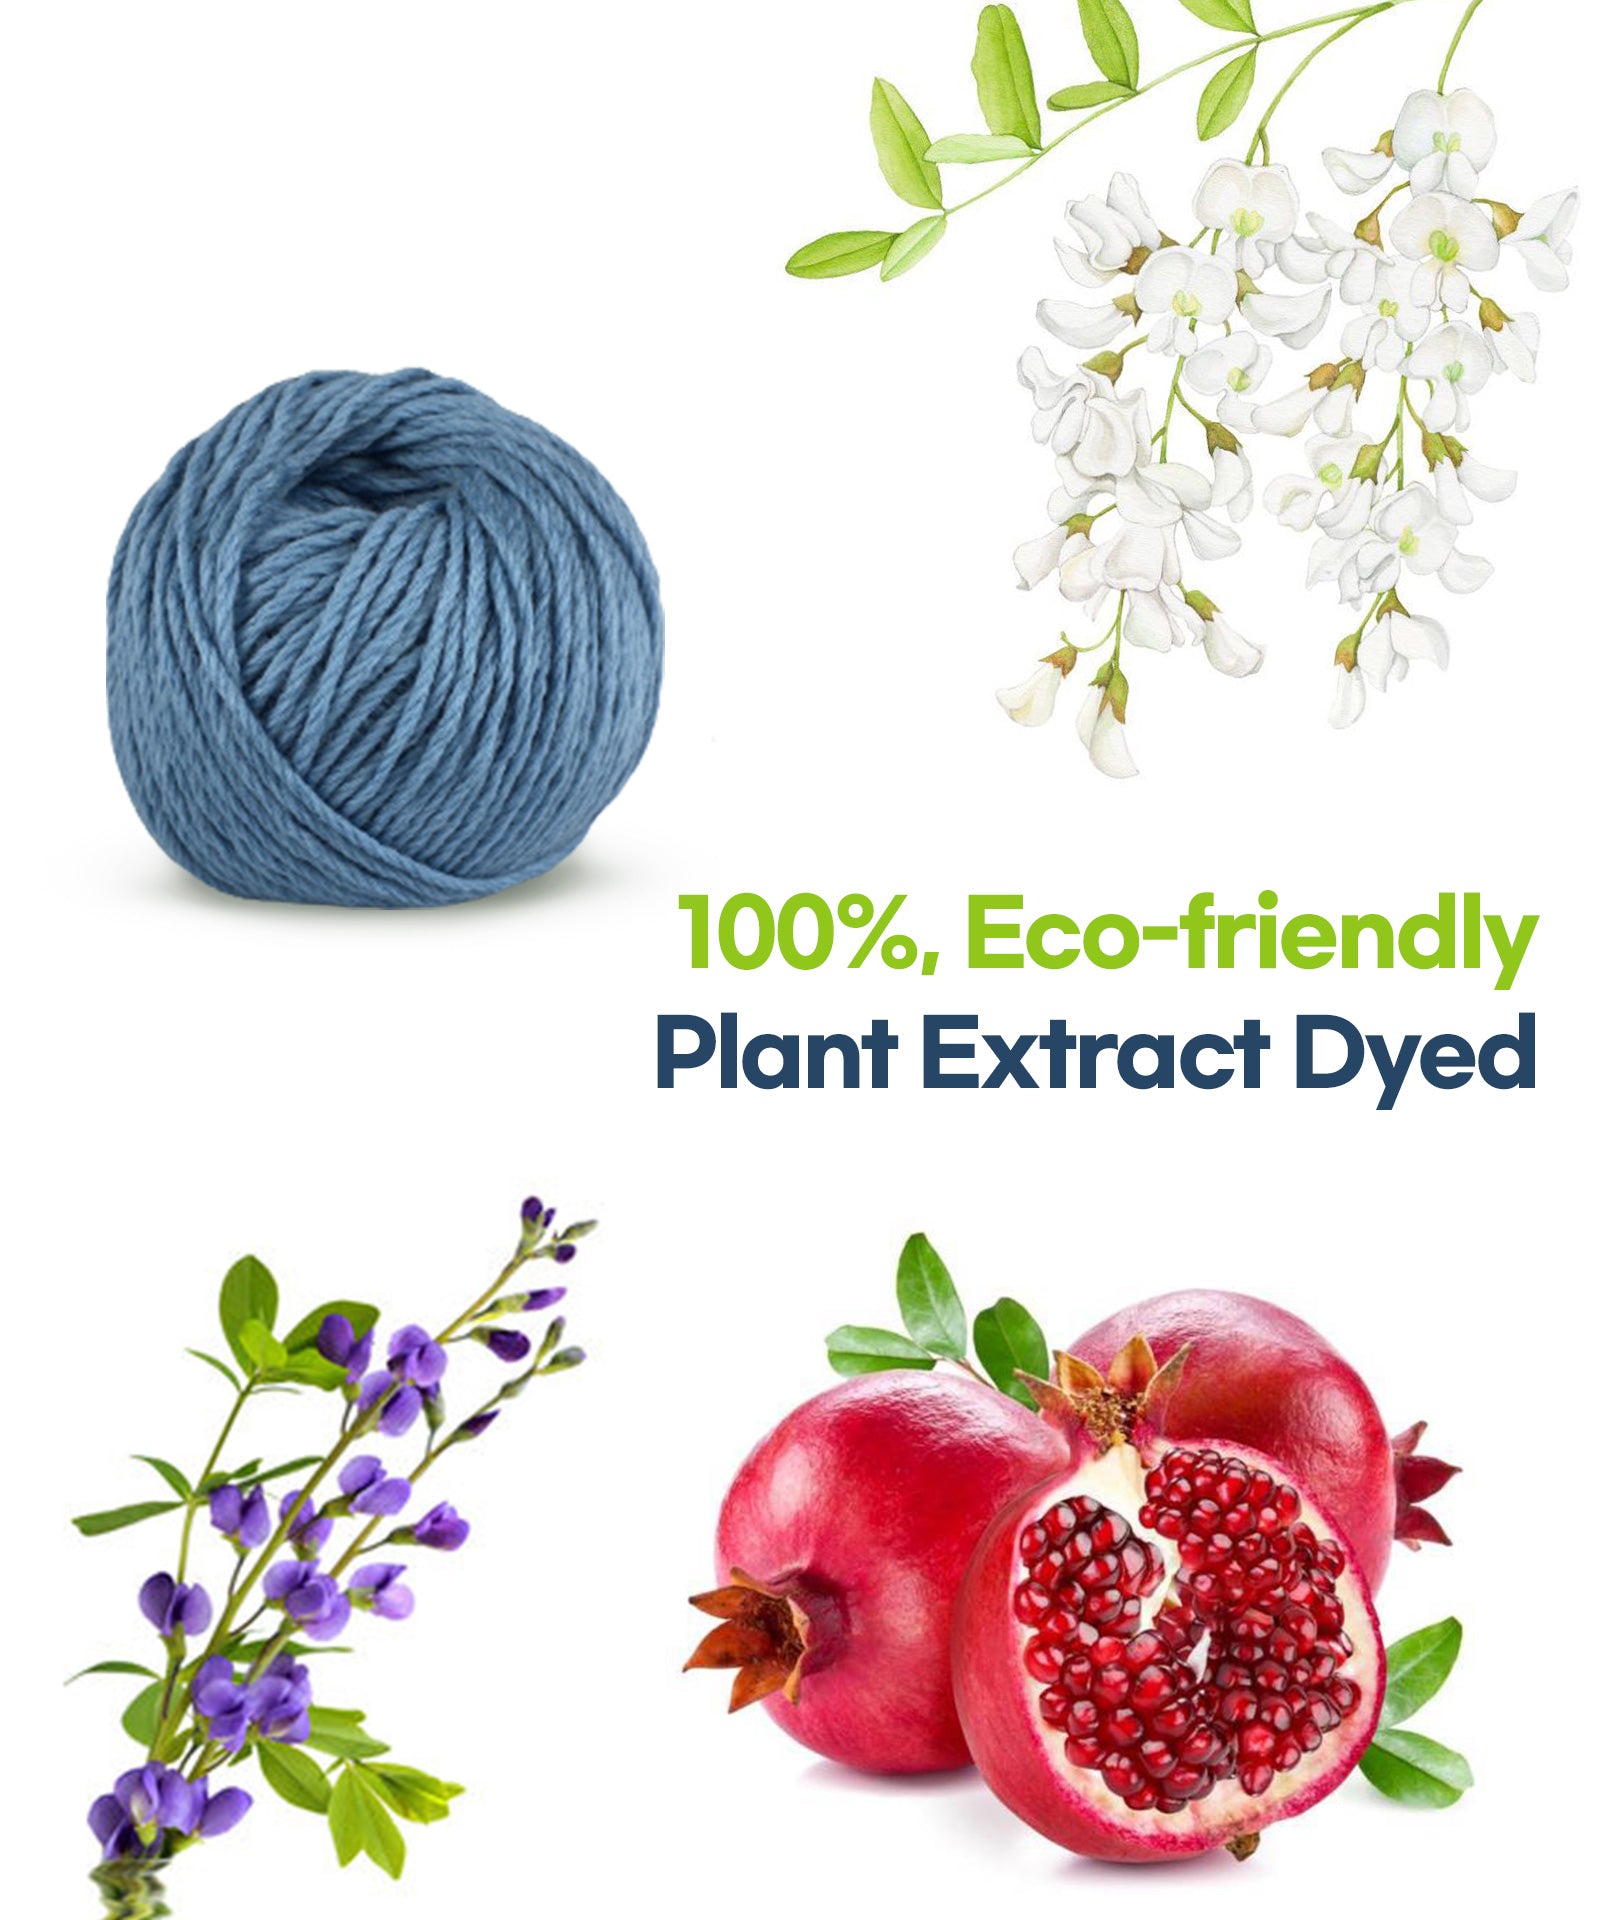 100%, Eco-friendly. plant extract dyed